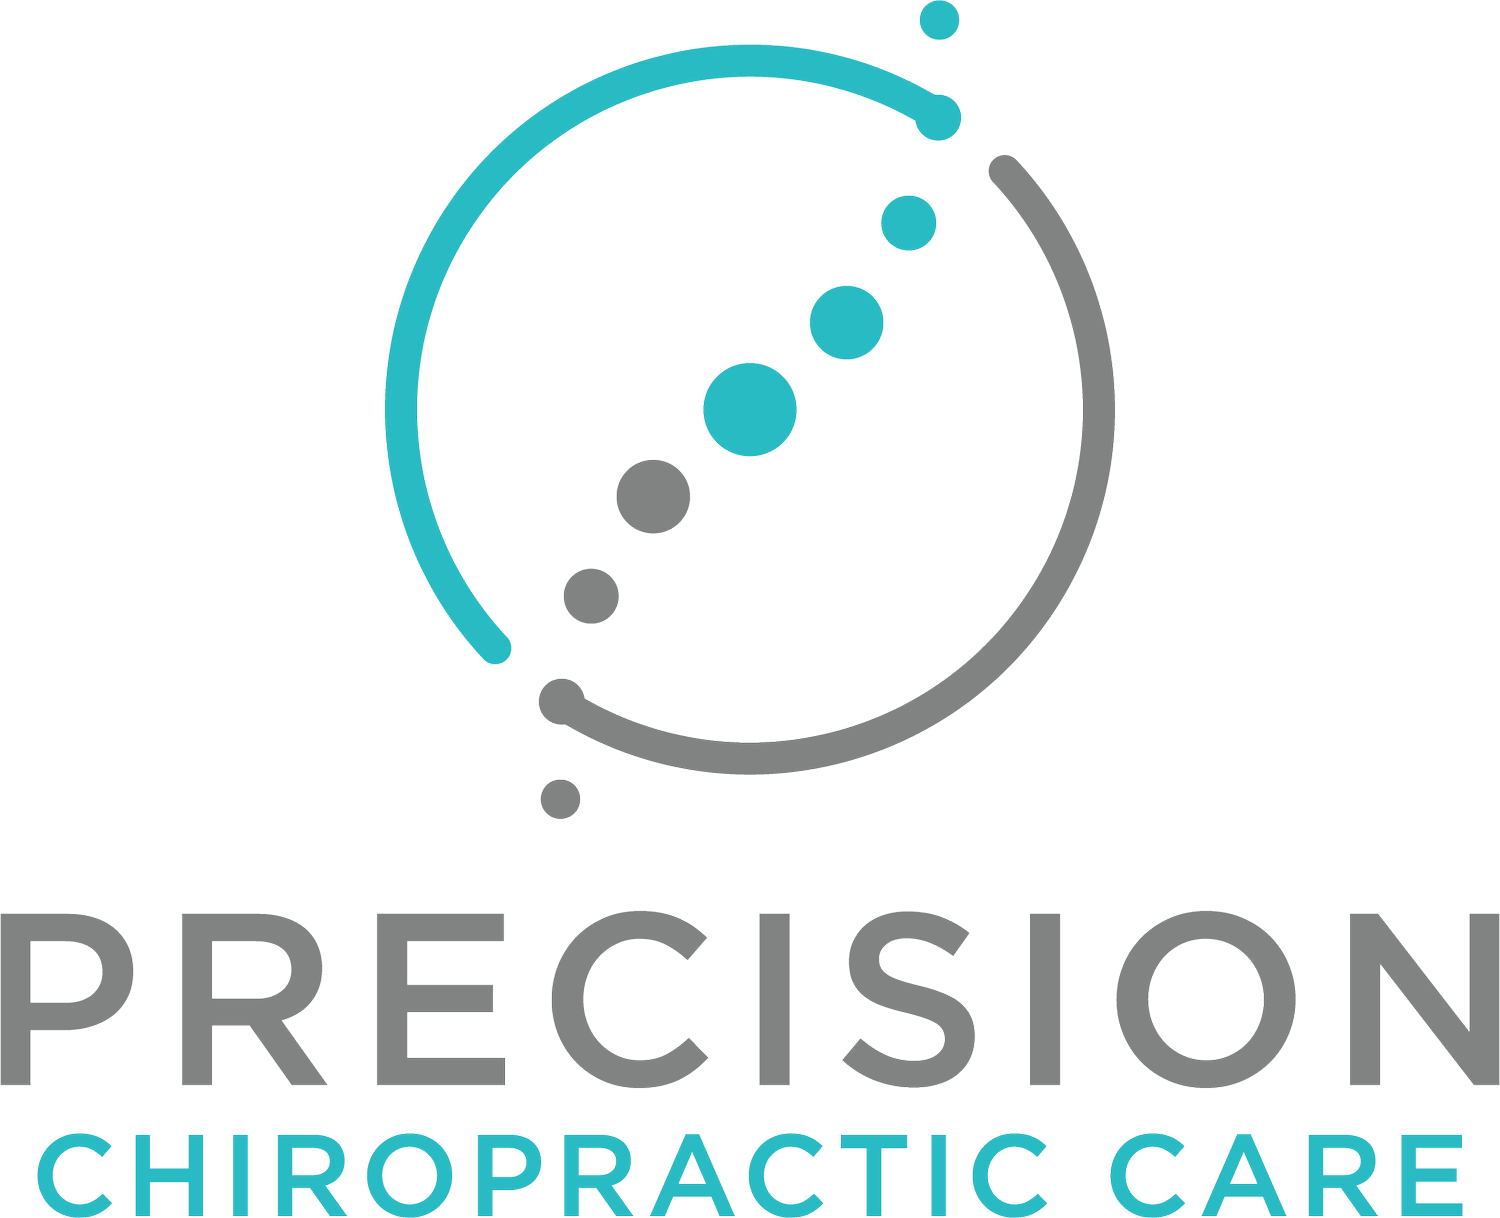 Precision Chiropractic Care Group